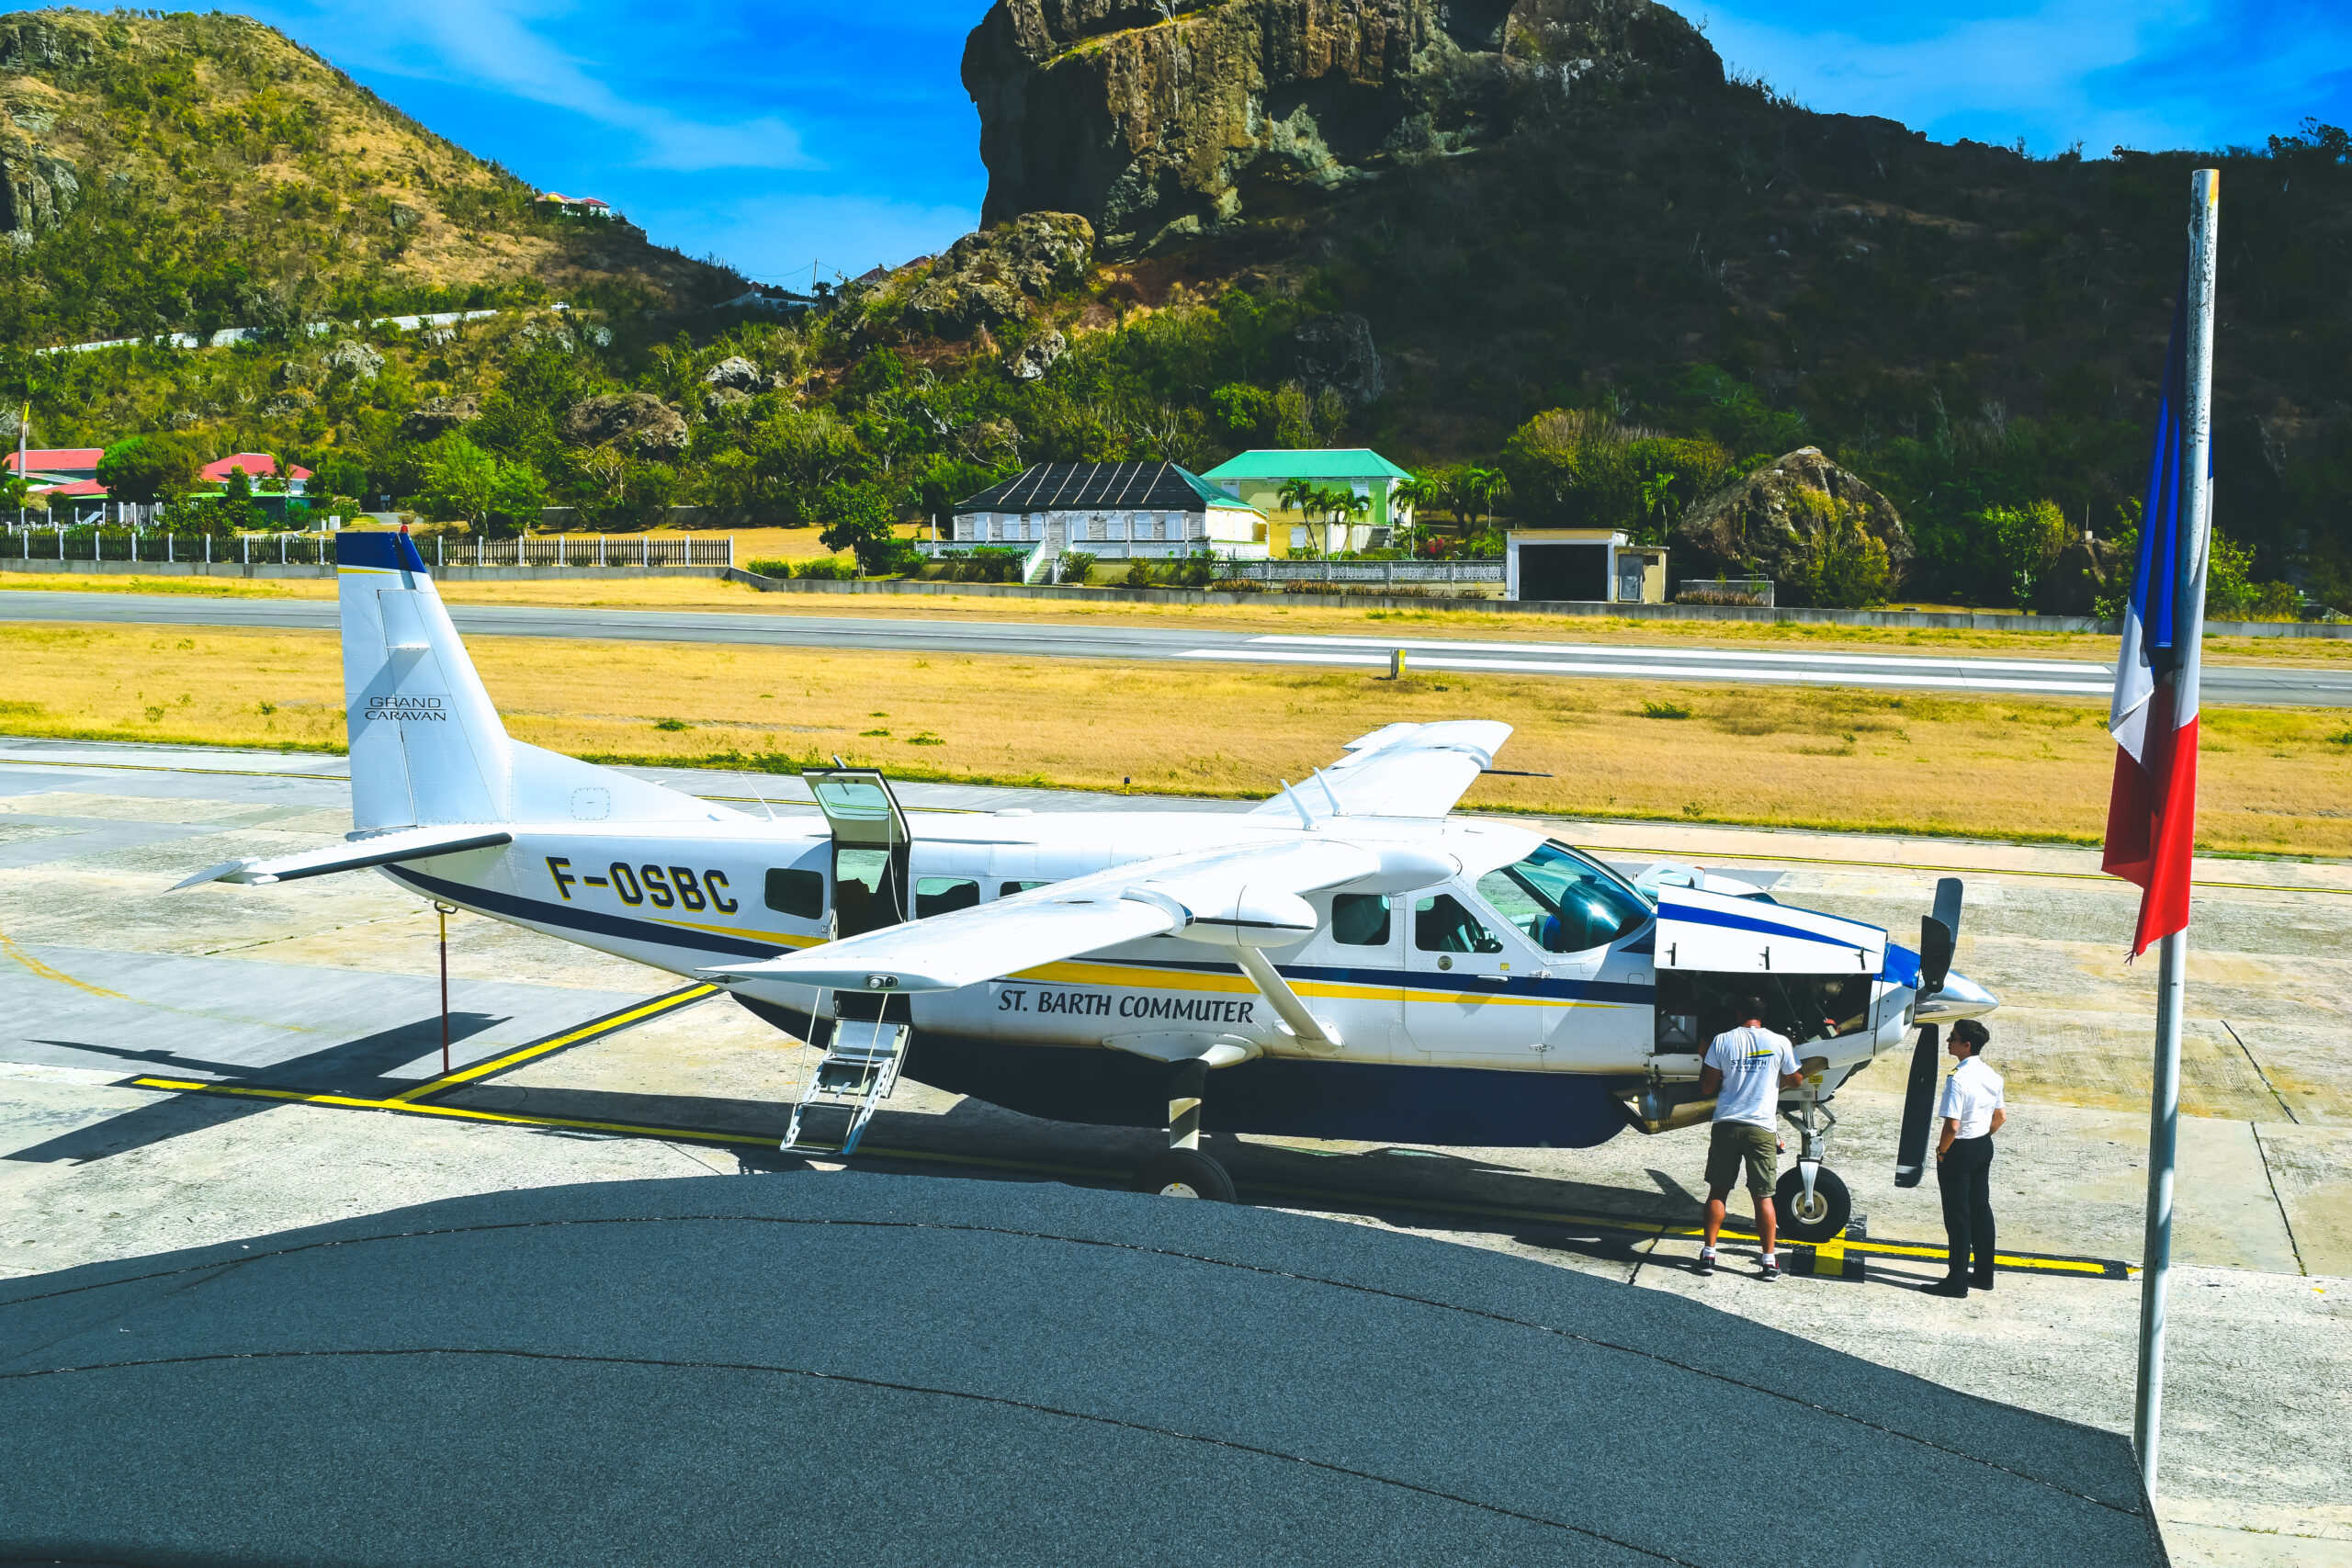 St Barth Travel Blog How to Get To St Barth How to get there St. Barth commuter plane SBH airport SXM ferry SVADORE Caribbean